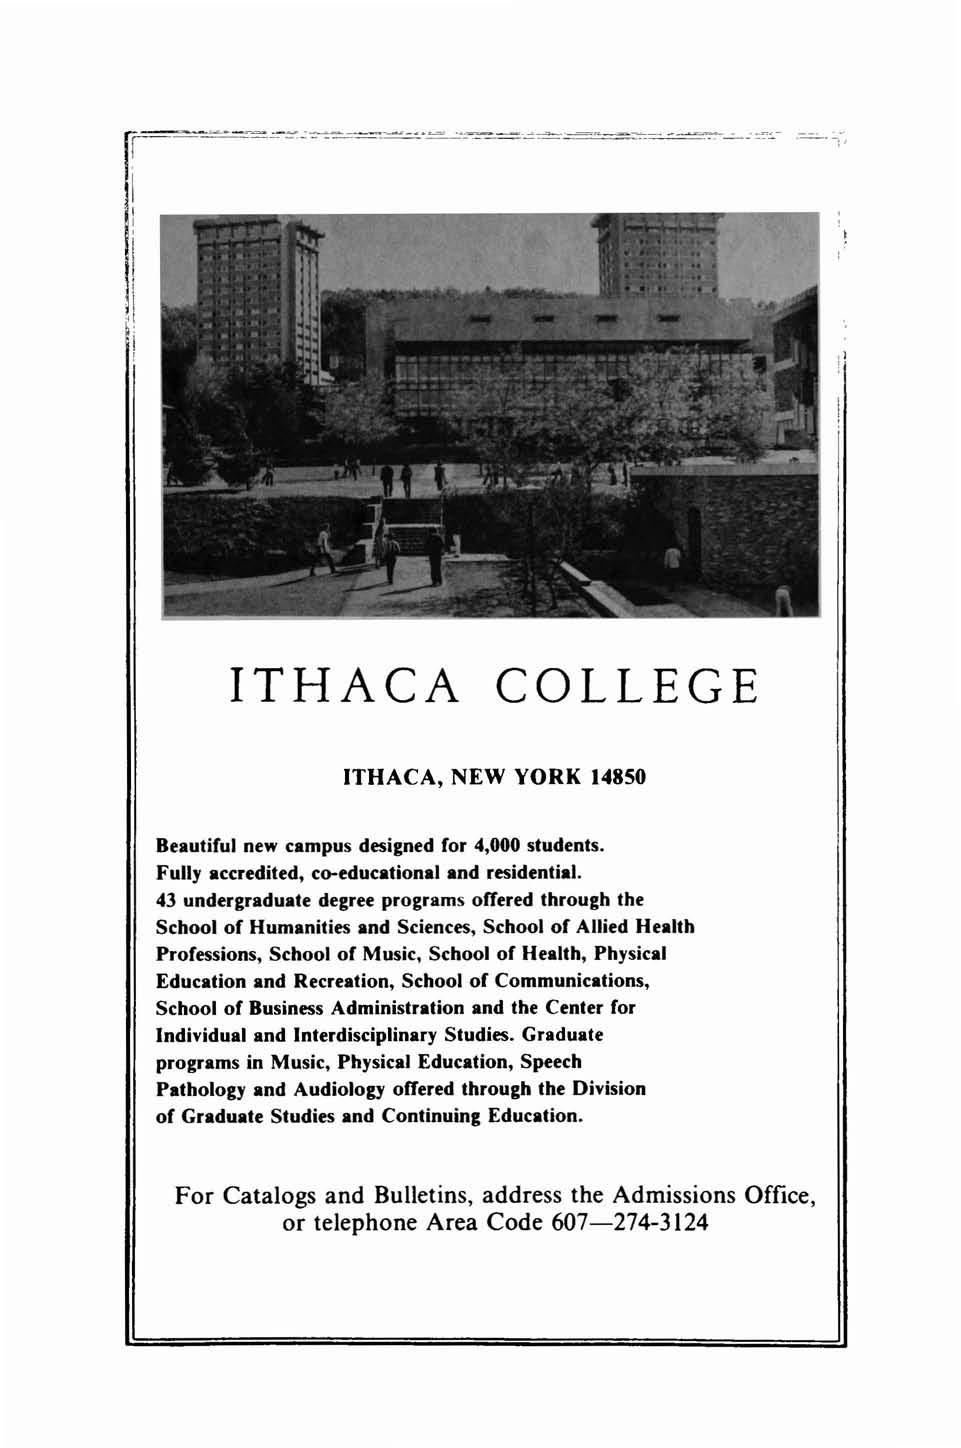 1_~~=C -=-=- ':: -::--::=--O==""'==- --"'O~-== -== ':"_=-CC==7:"--'- _- _ I 'I, I, I \.i1 b: ' I! d! ITHACA COLLEGE ITHACA, NEW YORK 14850 Beautiful new campus designed for 4,000 students.